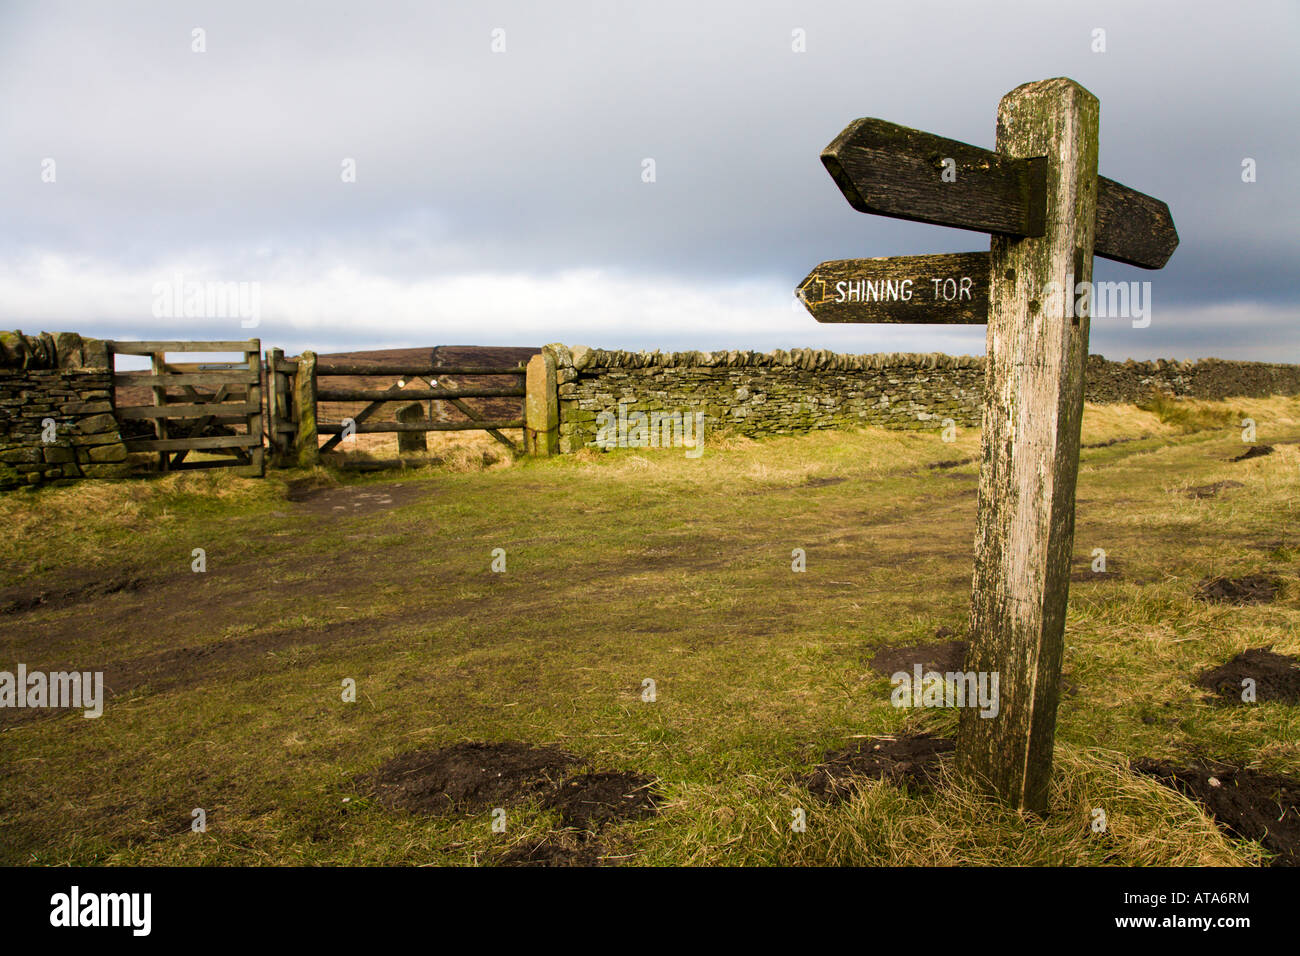 Shining Tor to Cat and Fiddle pub wooden sign in the Peak District, looking though farm gate towards Shining Tor Stock Photo